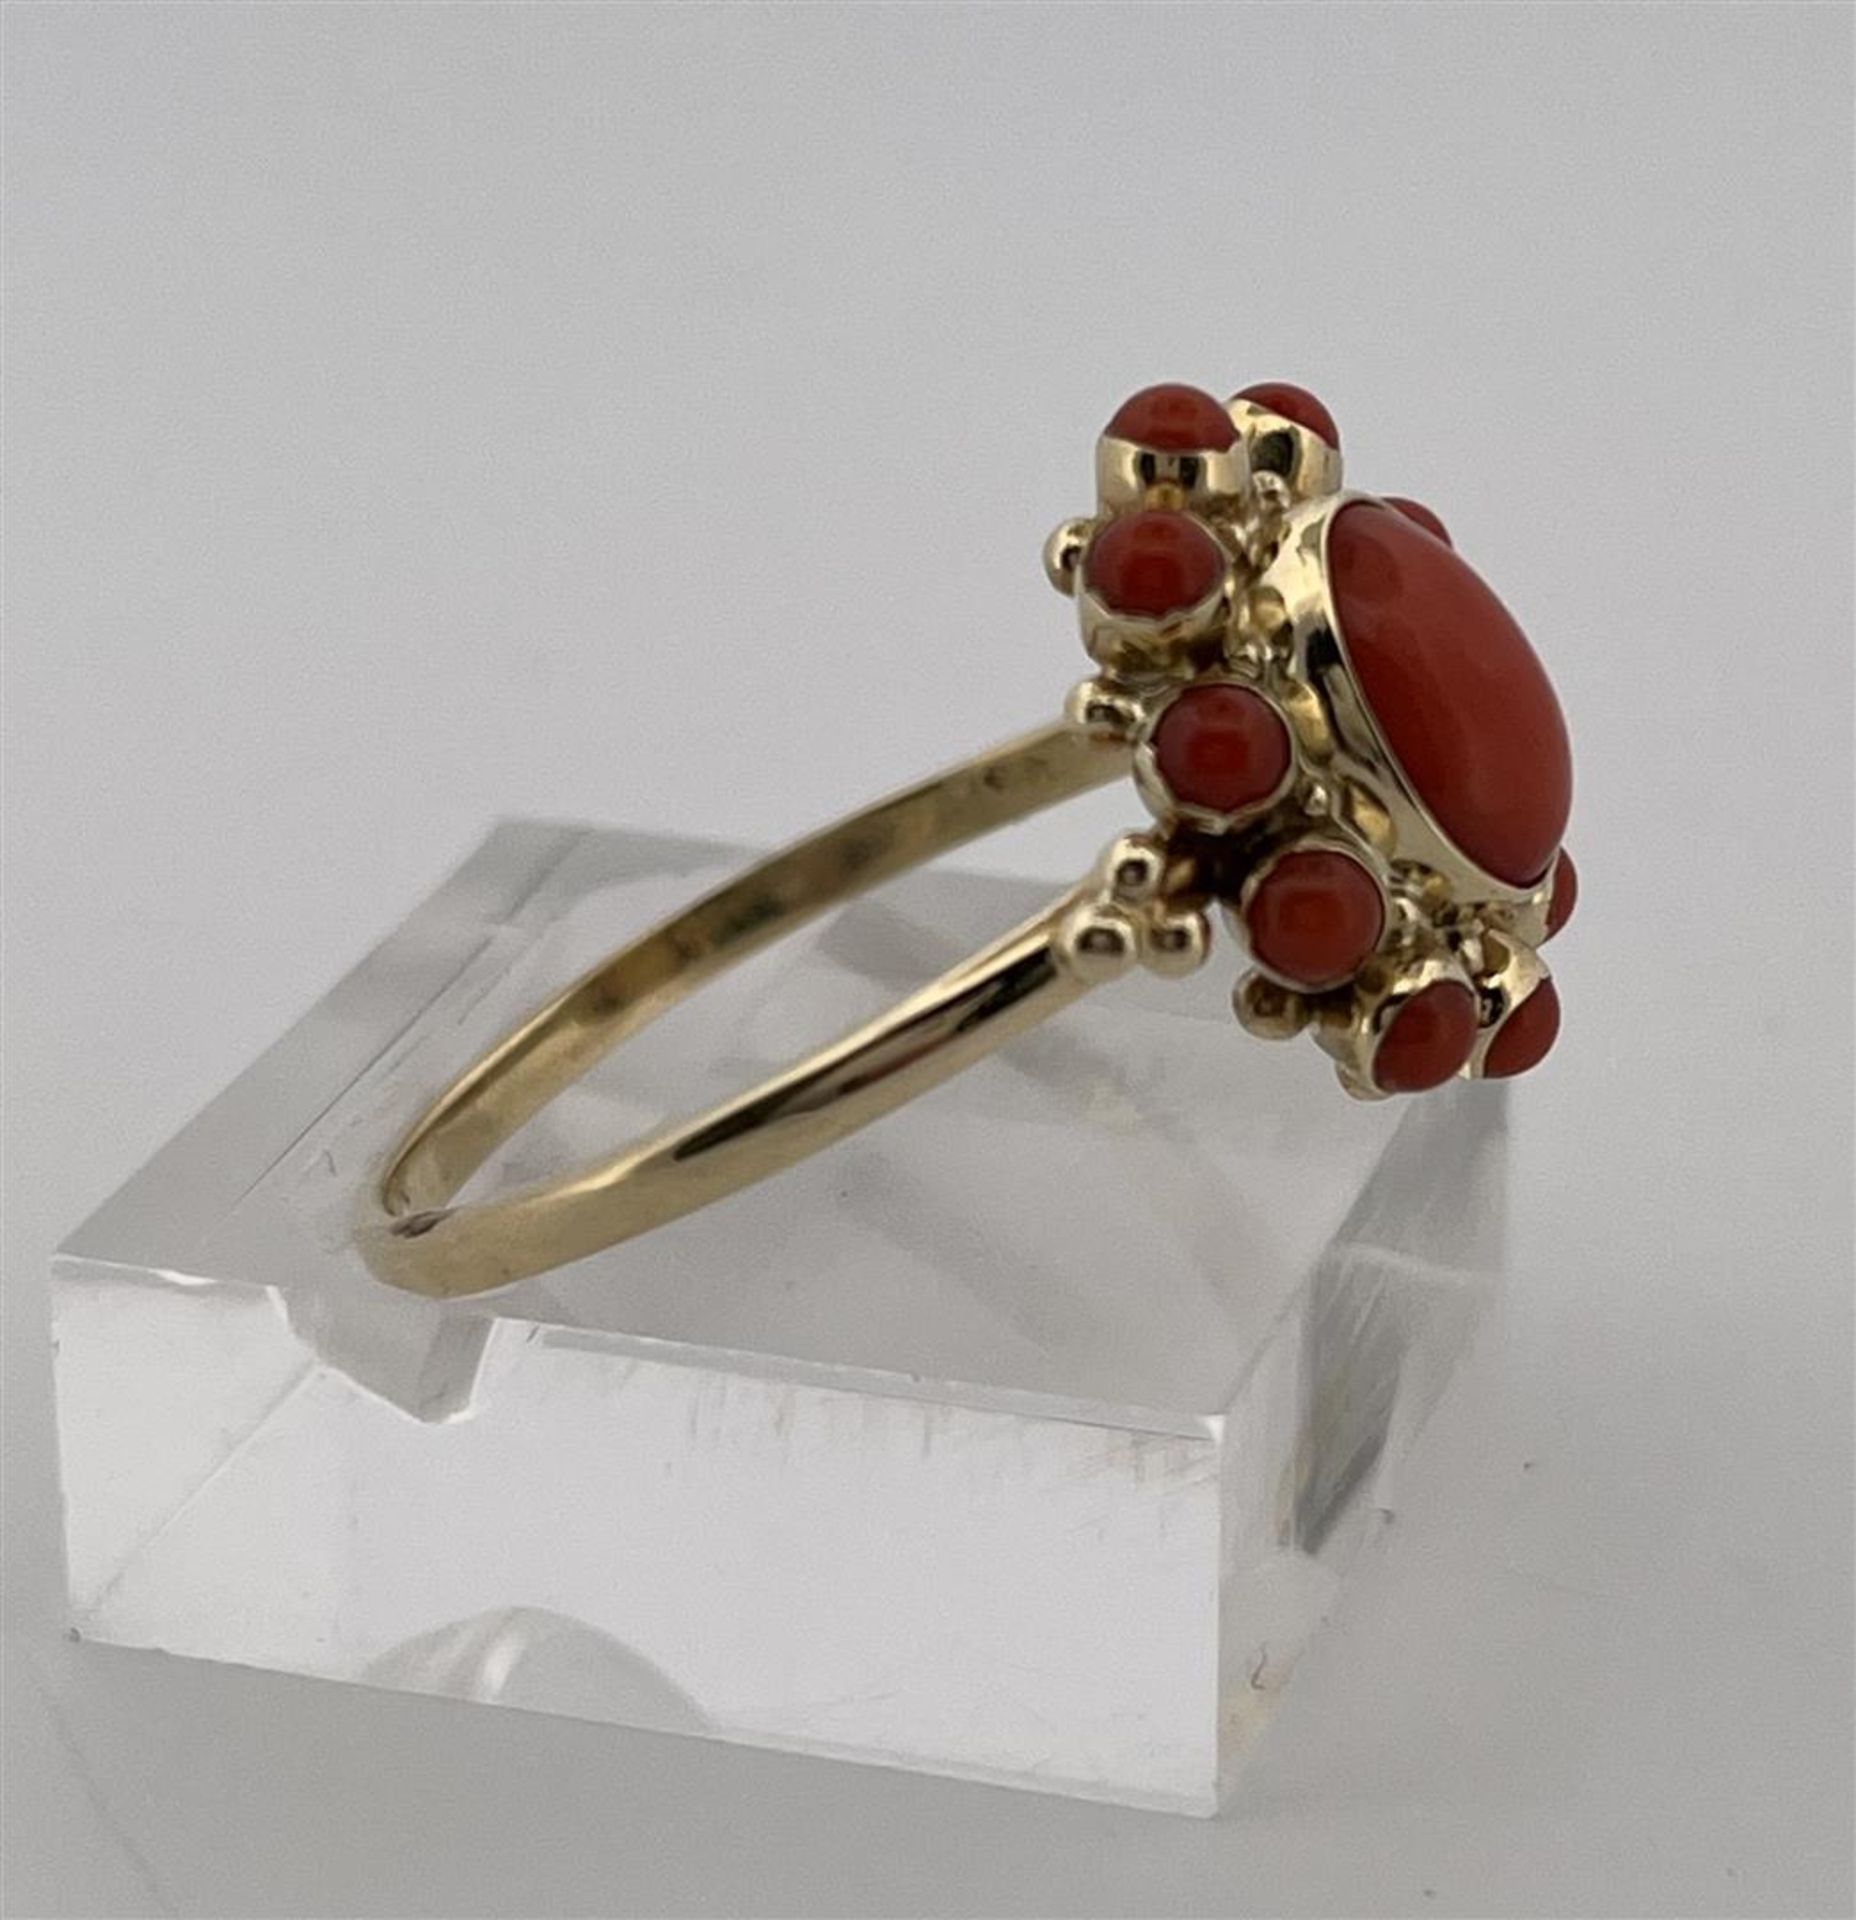 14kt yellow gold rosette ring set with red coral.
The ring is set with 1 central oval cabochon cut r - Image 7 of 7